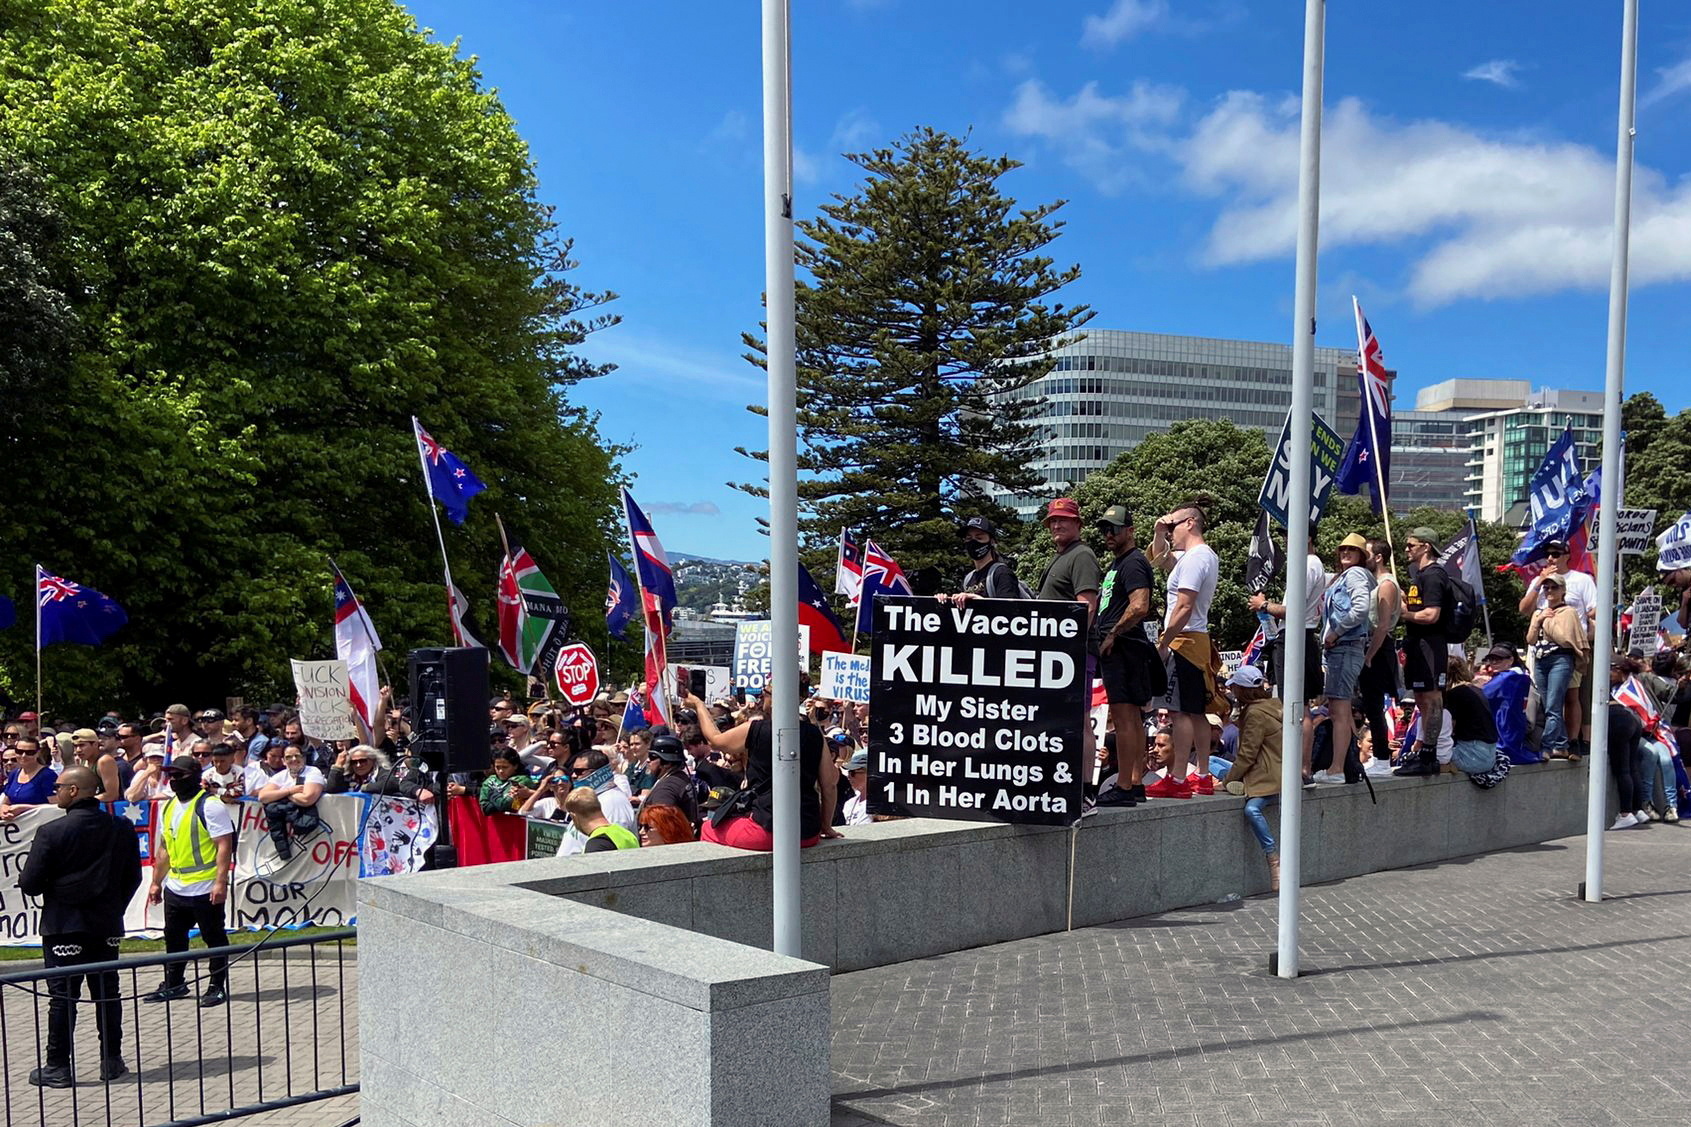 Thousands protest in New Zealand against COVID-19 rules QRHIPGQP5JORRHL7R7F5QPCWH4